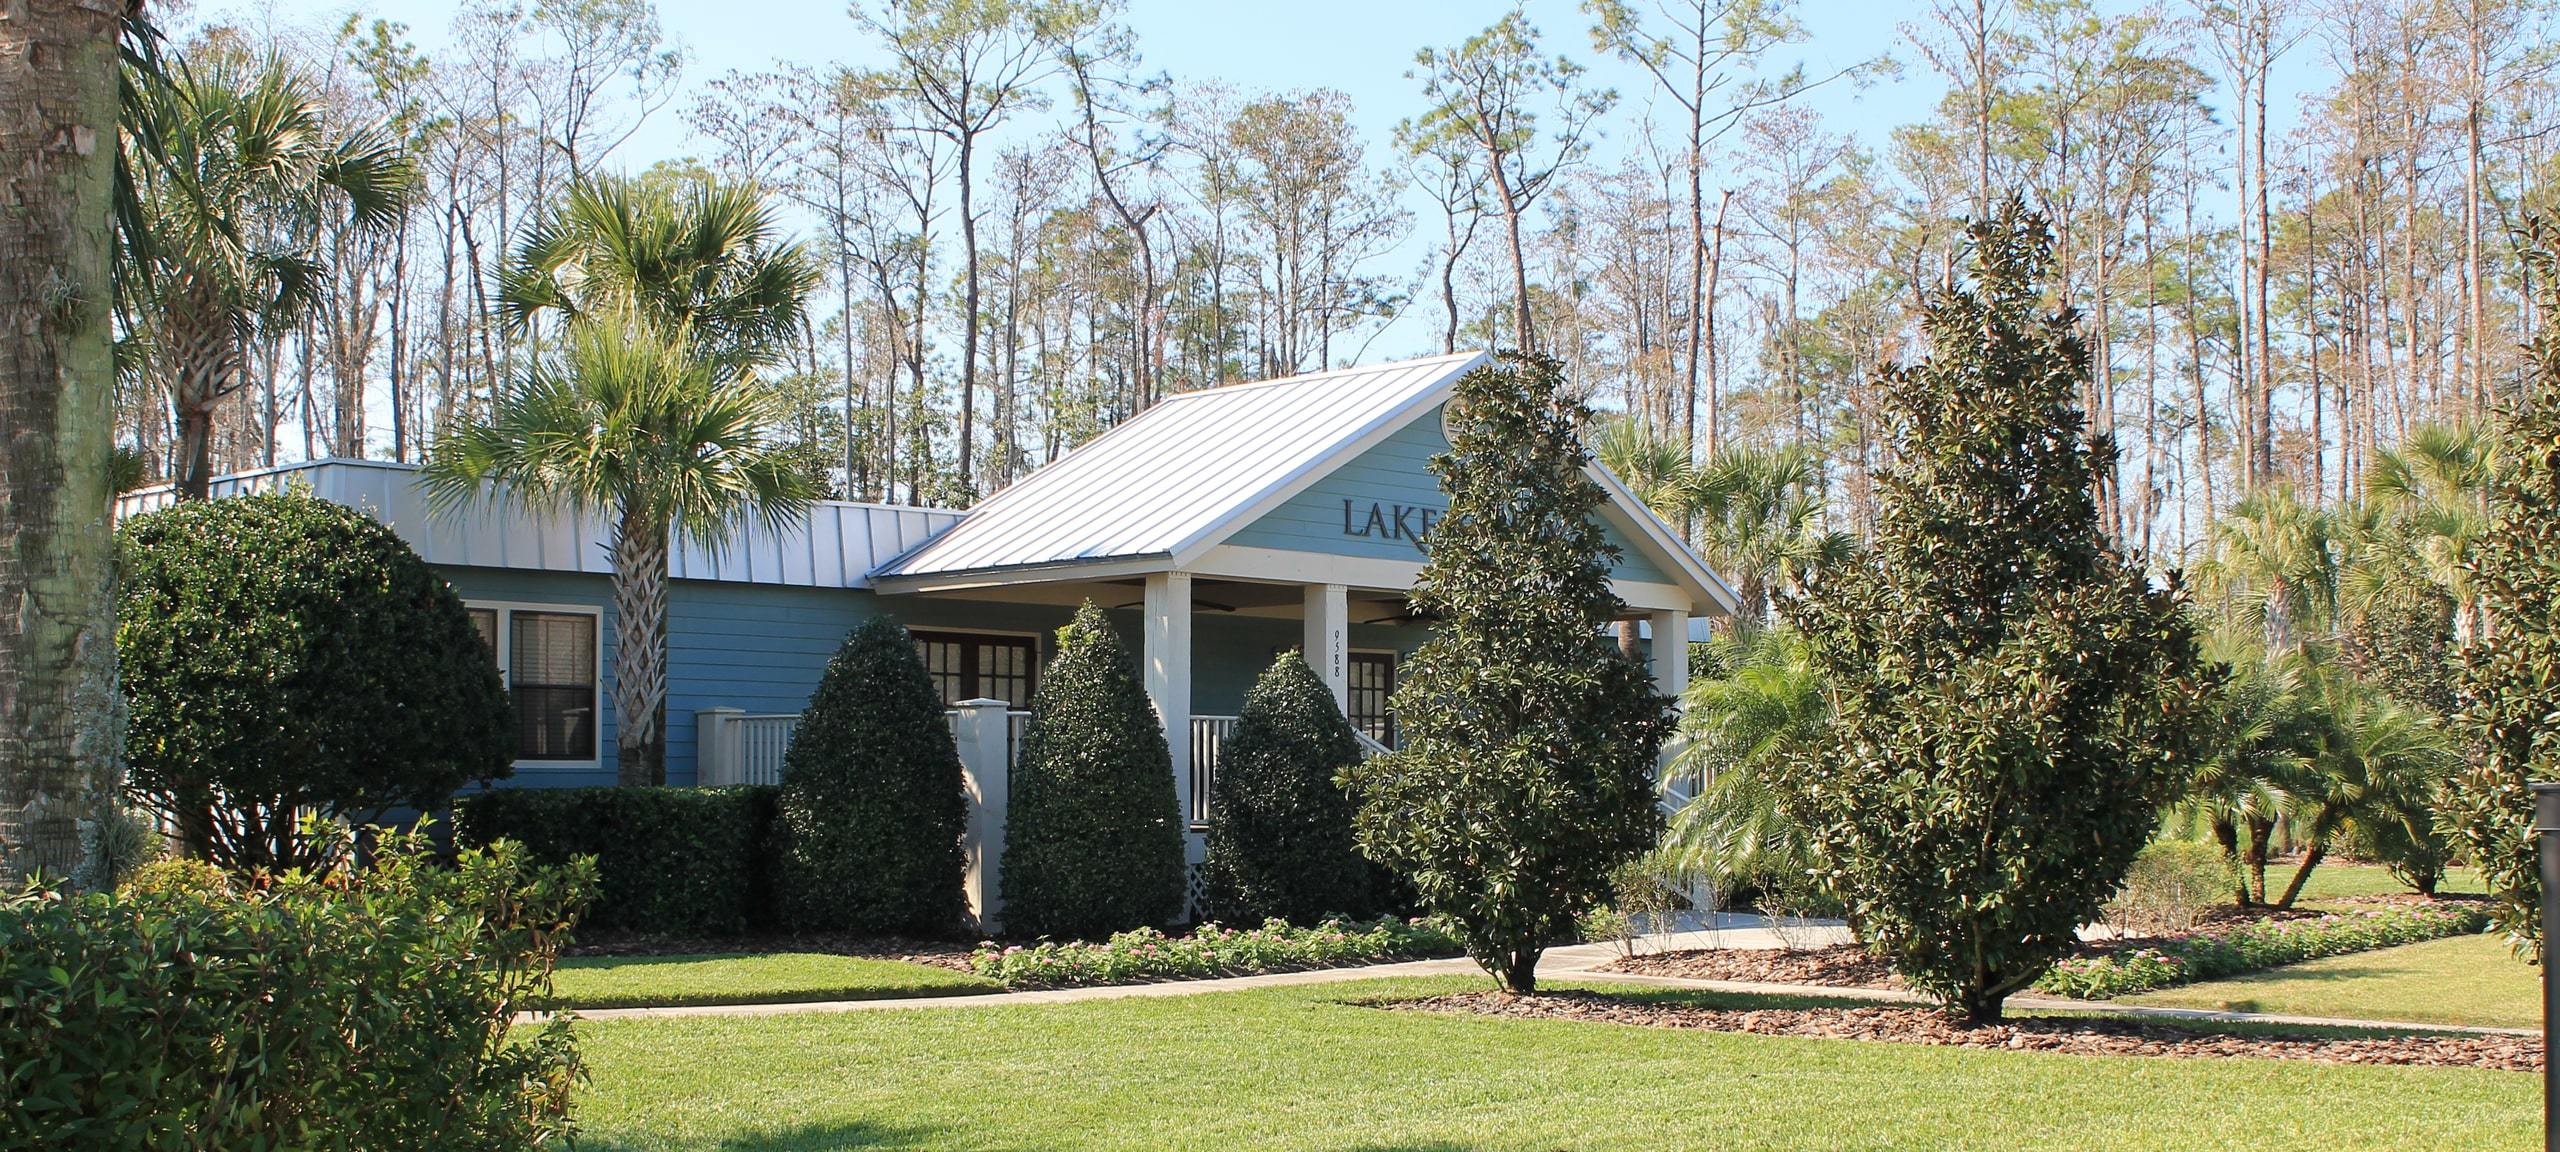 Exterior of Lake Nona Community Center and trees